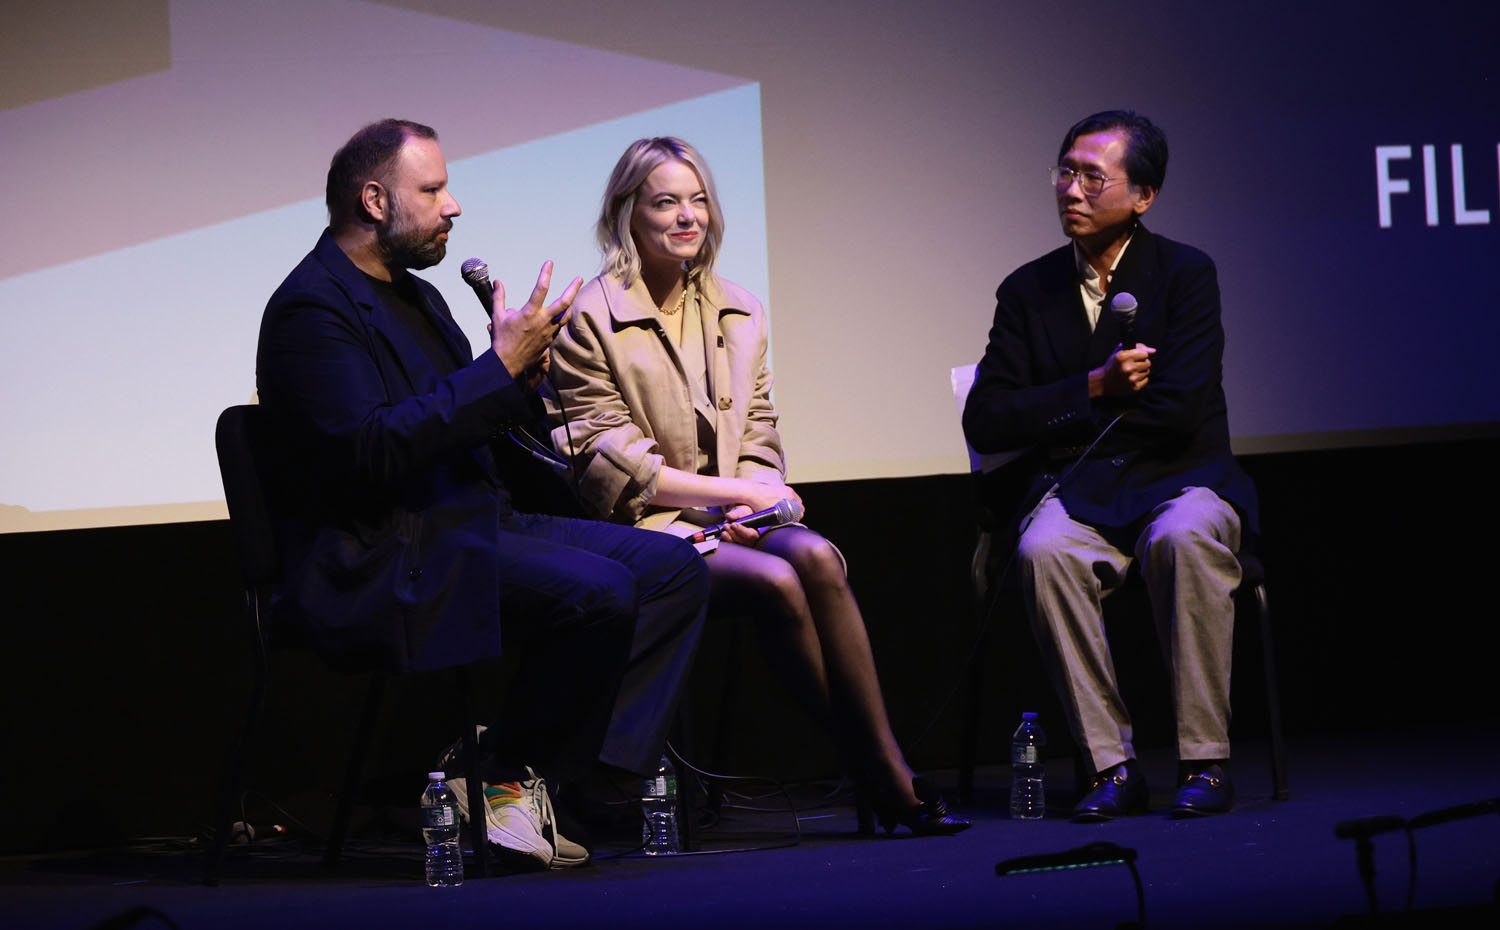 Emma Stone and Yorgos Lanthimos find a loophole to promote struck work,  their film Poor Things, while at NYFF to promote short film, Bleat